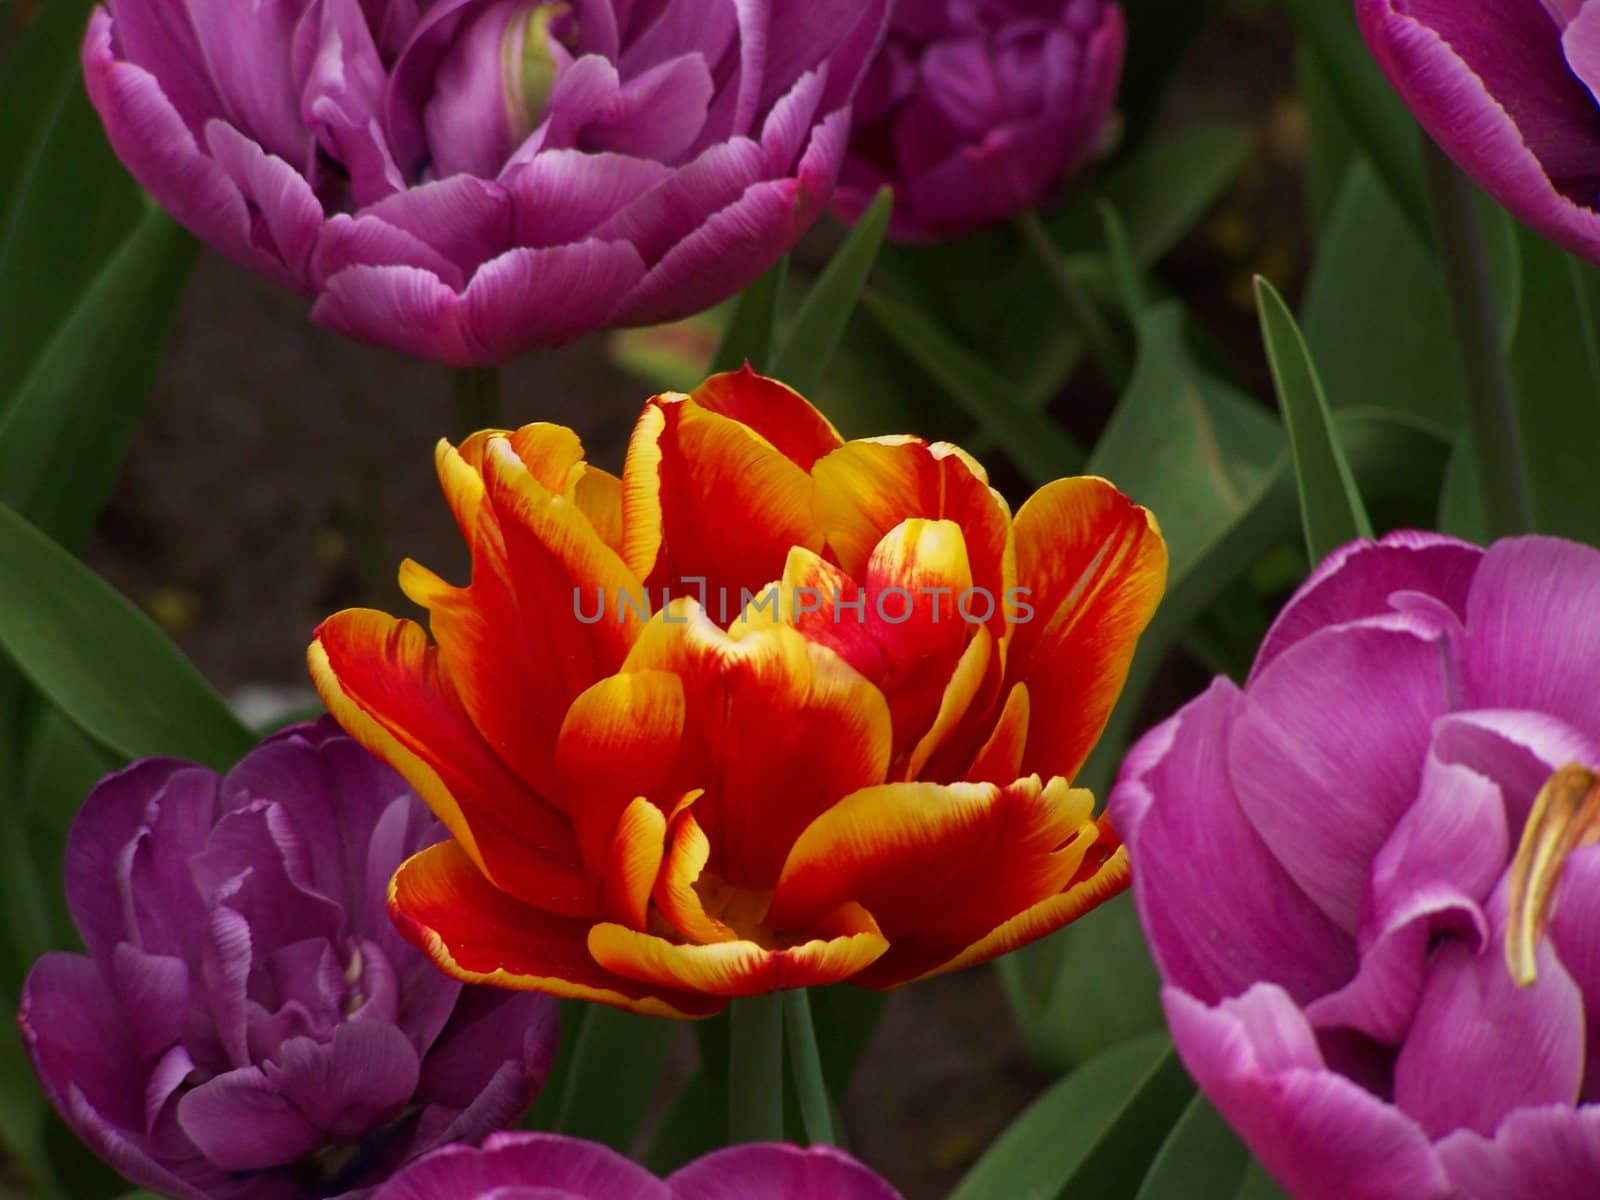 Bright colors of the tulips. Close up.